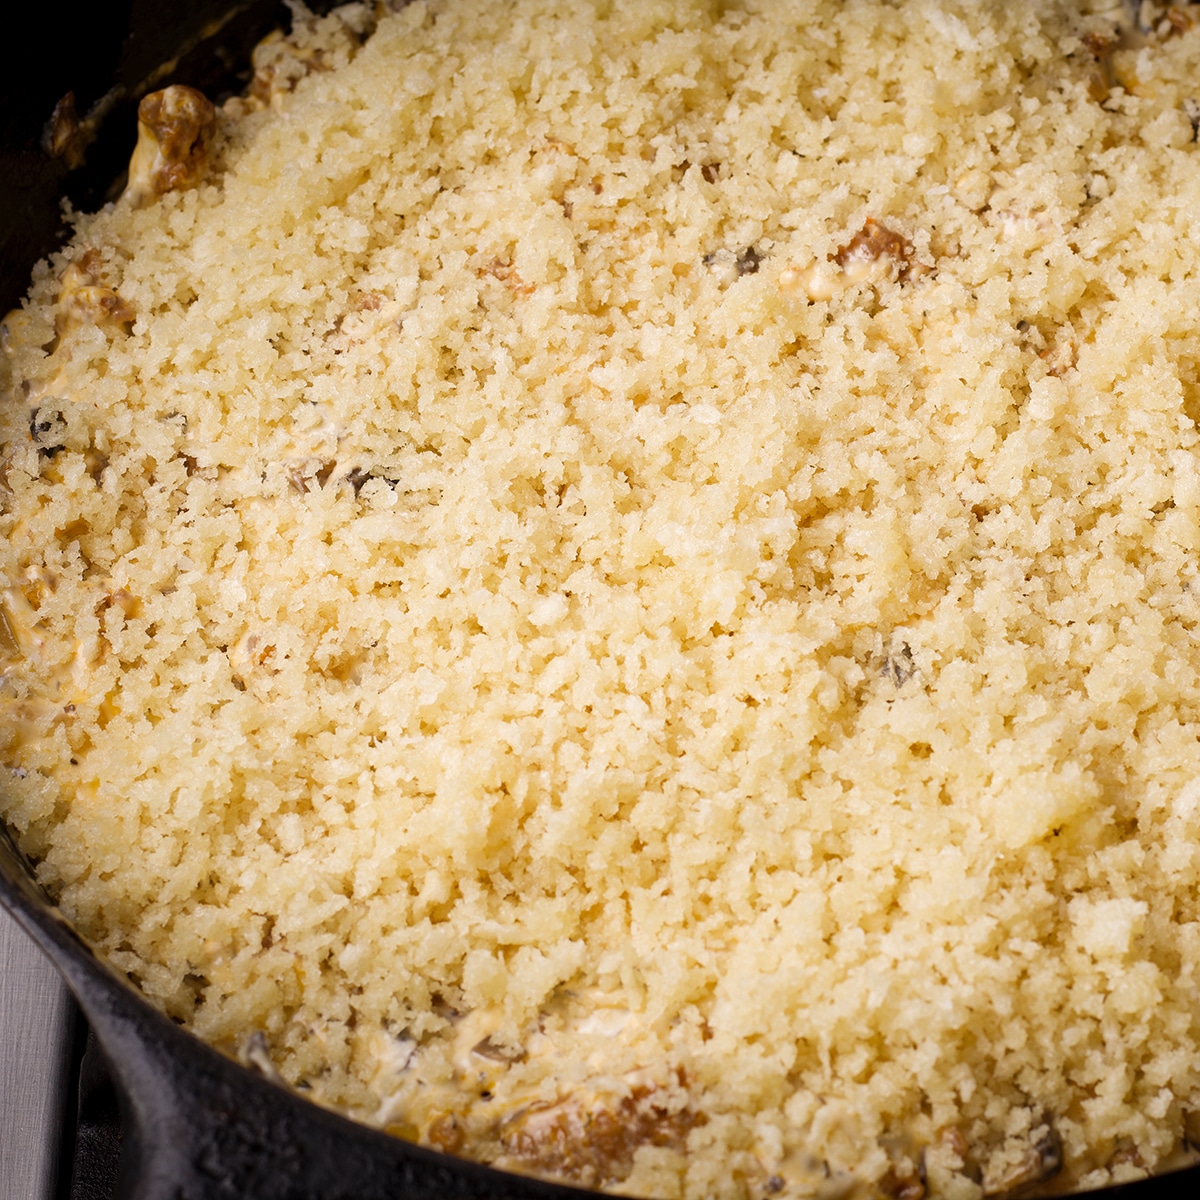 A cast iron skillet filled with stuffed mushroom dip and topped with panko bread crumbs.